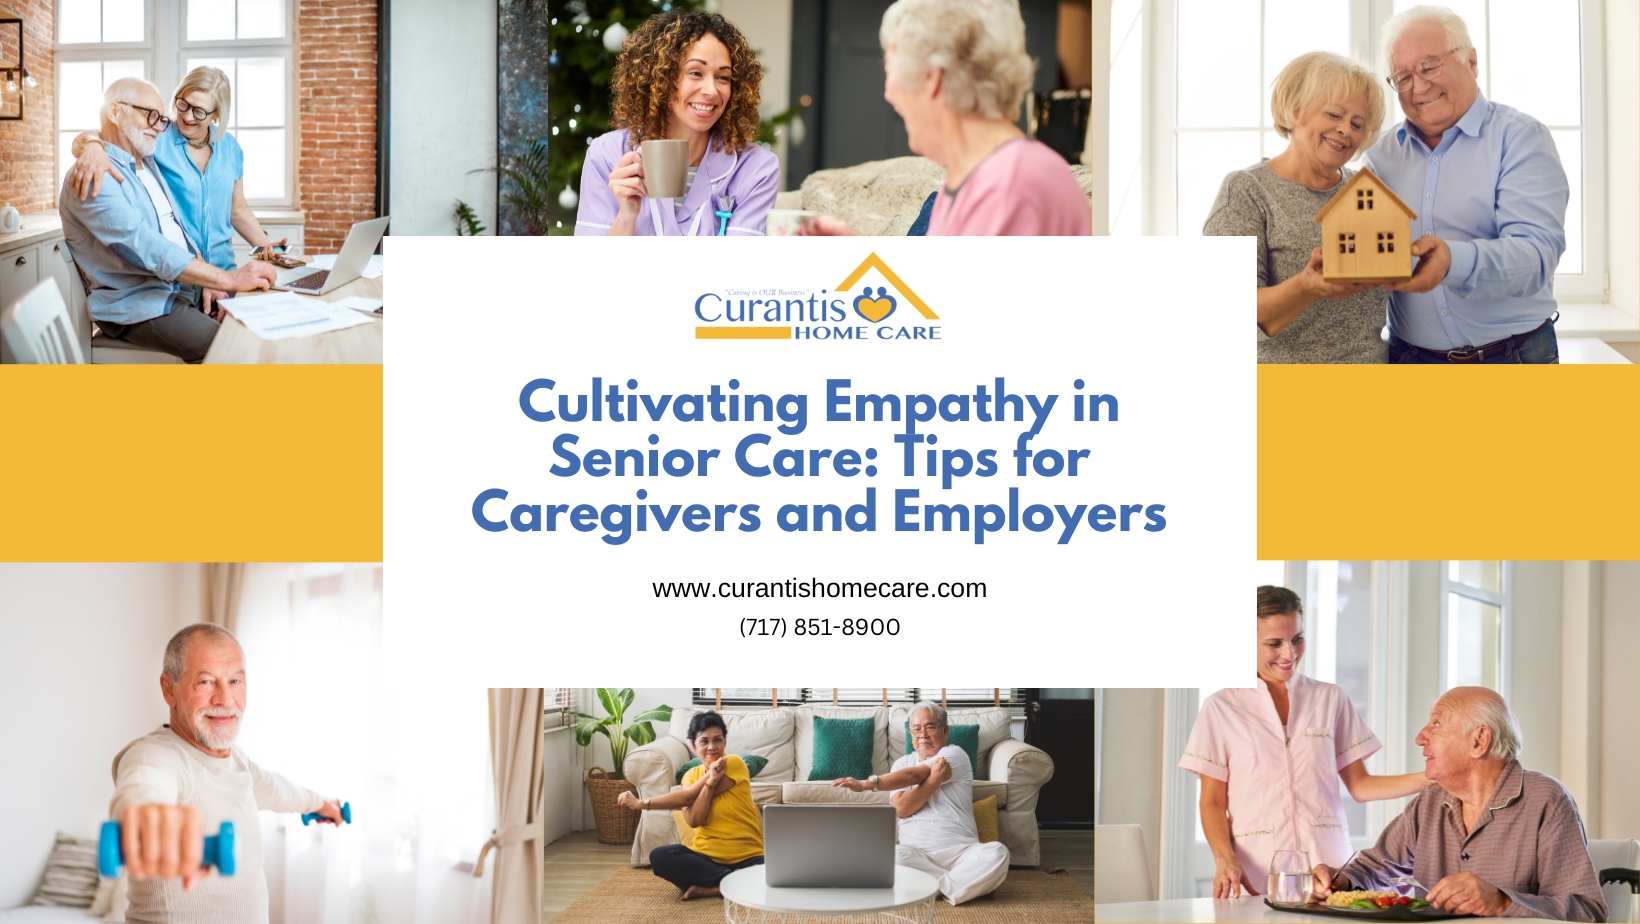 Cultivating Empathy in Senior Care- Tips for Caregivers and Employers